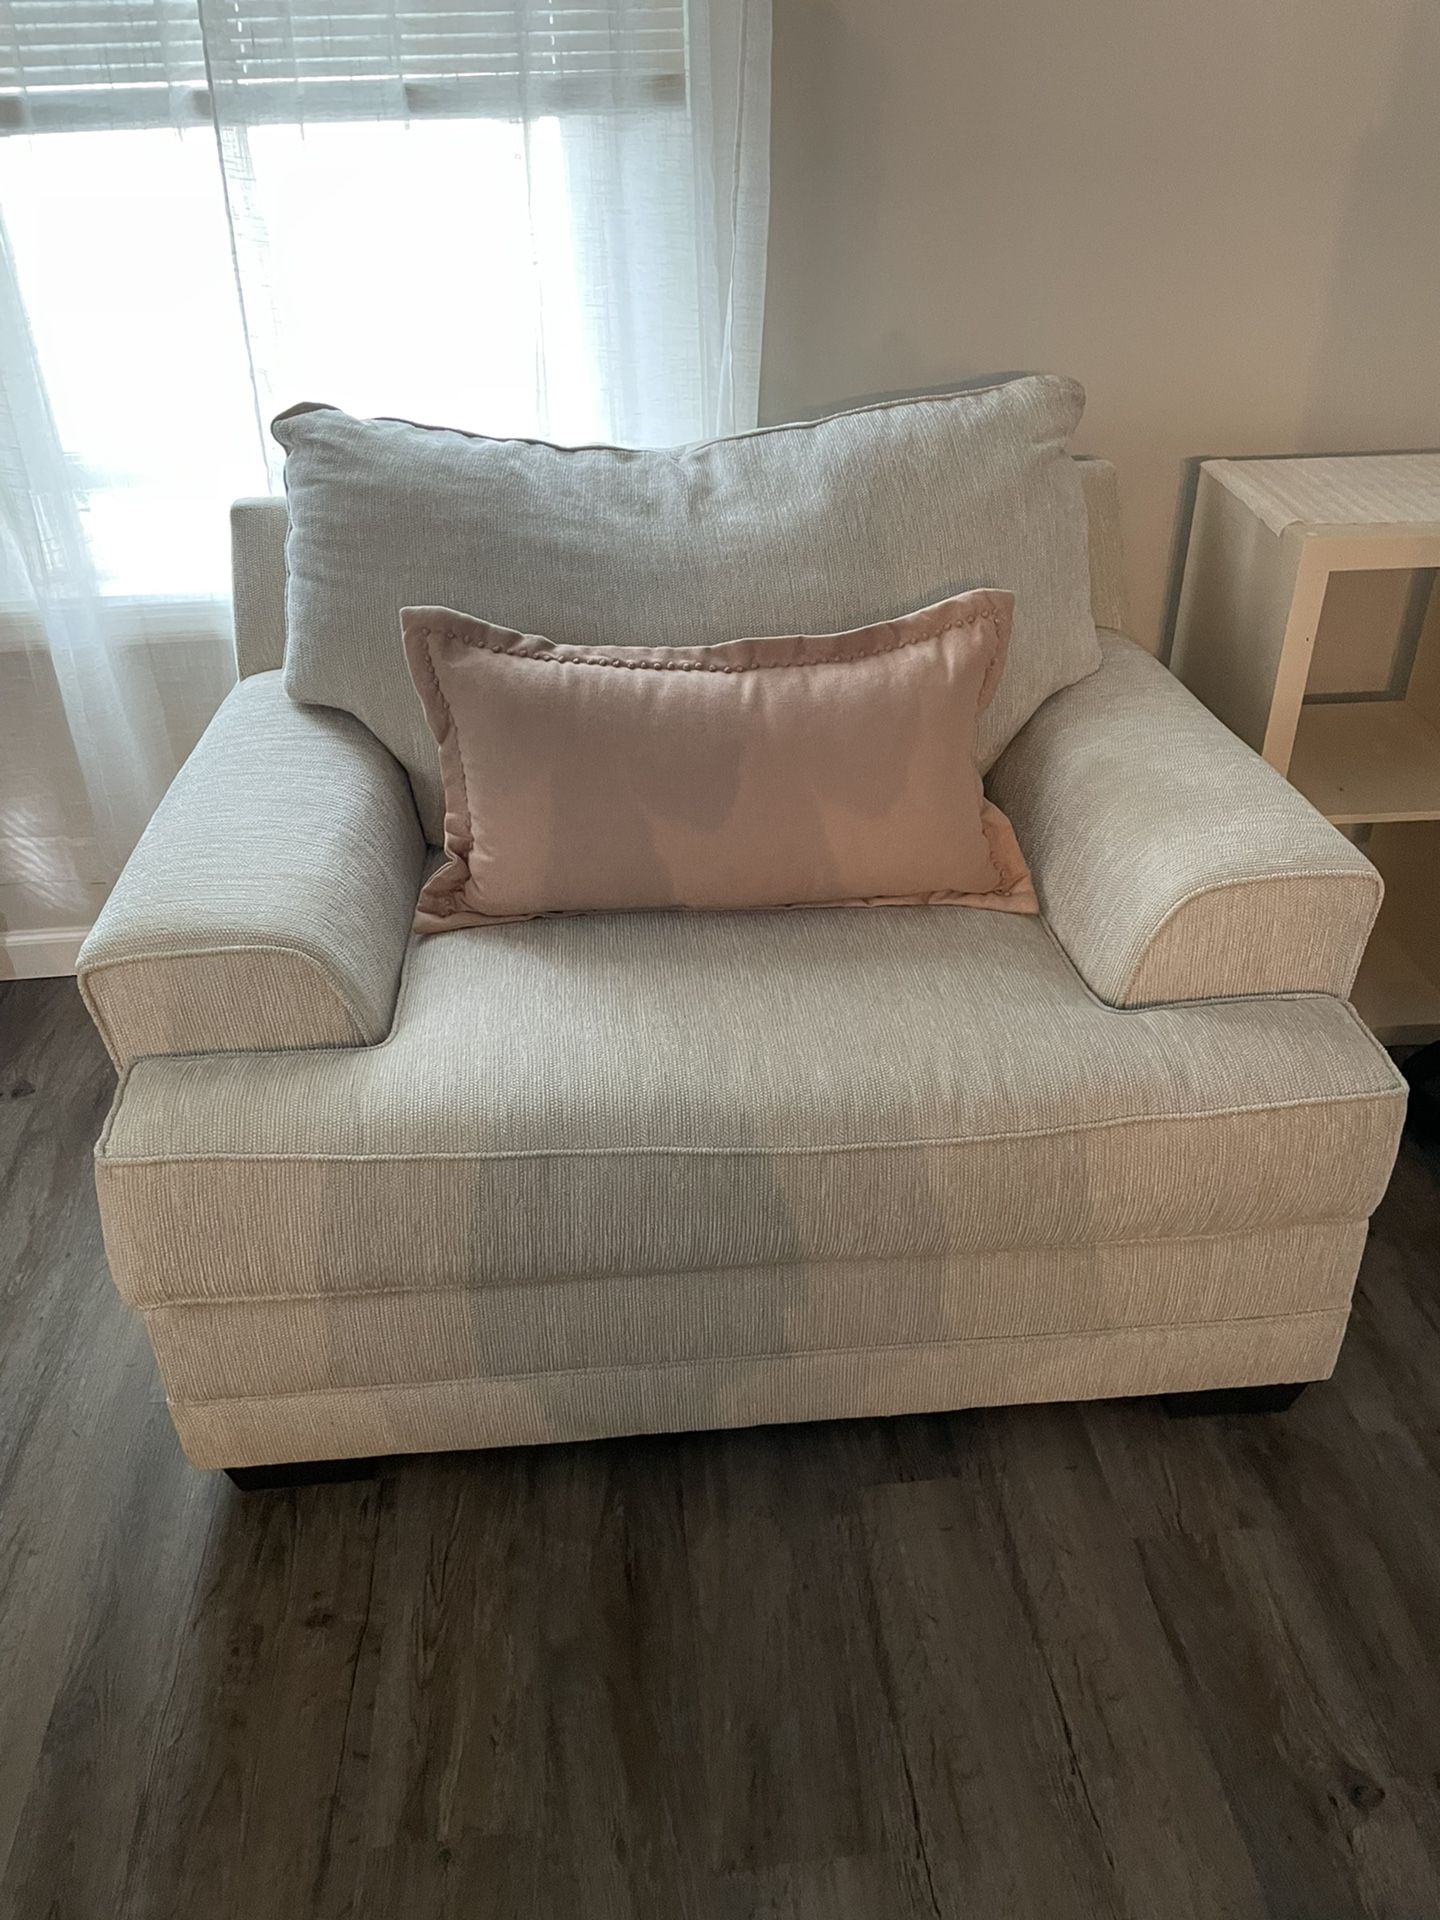 $250.00 Living Room Chair